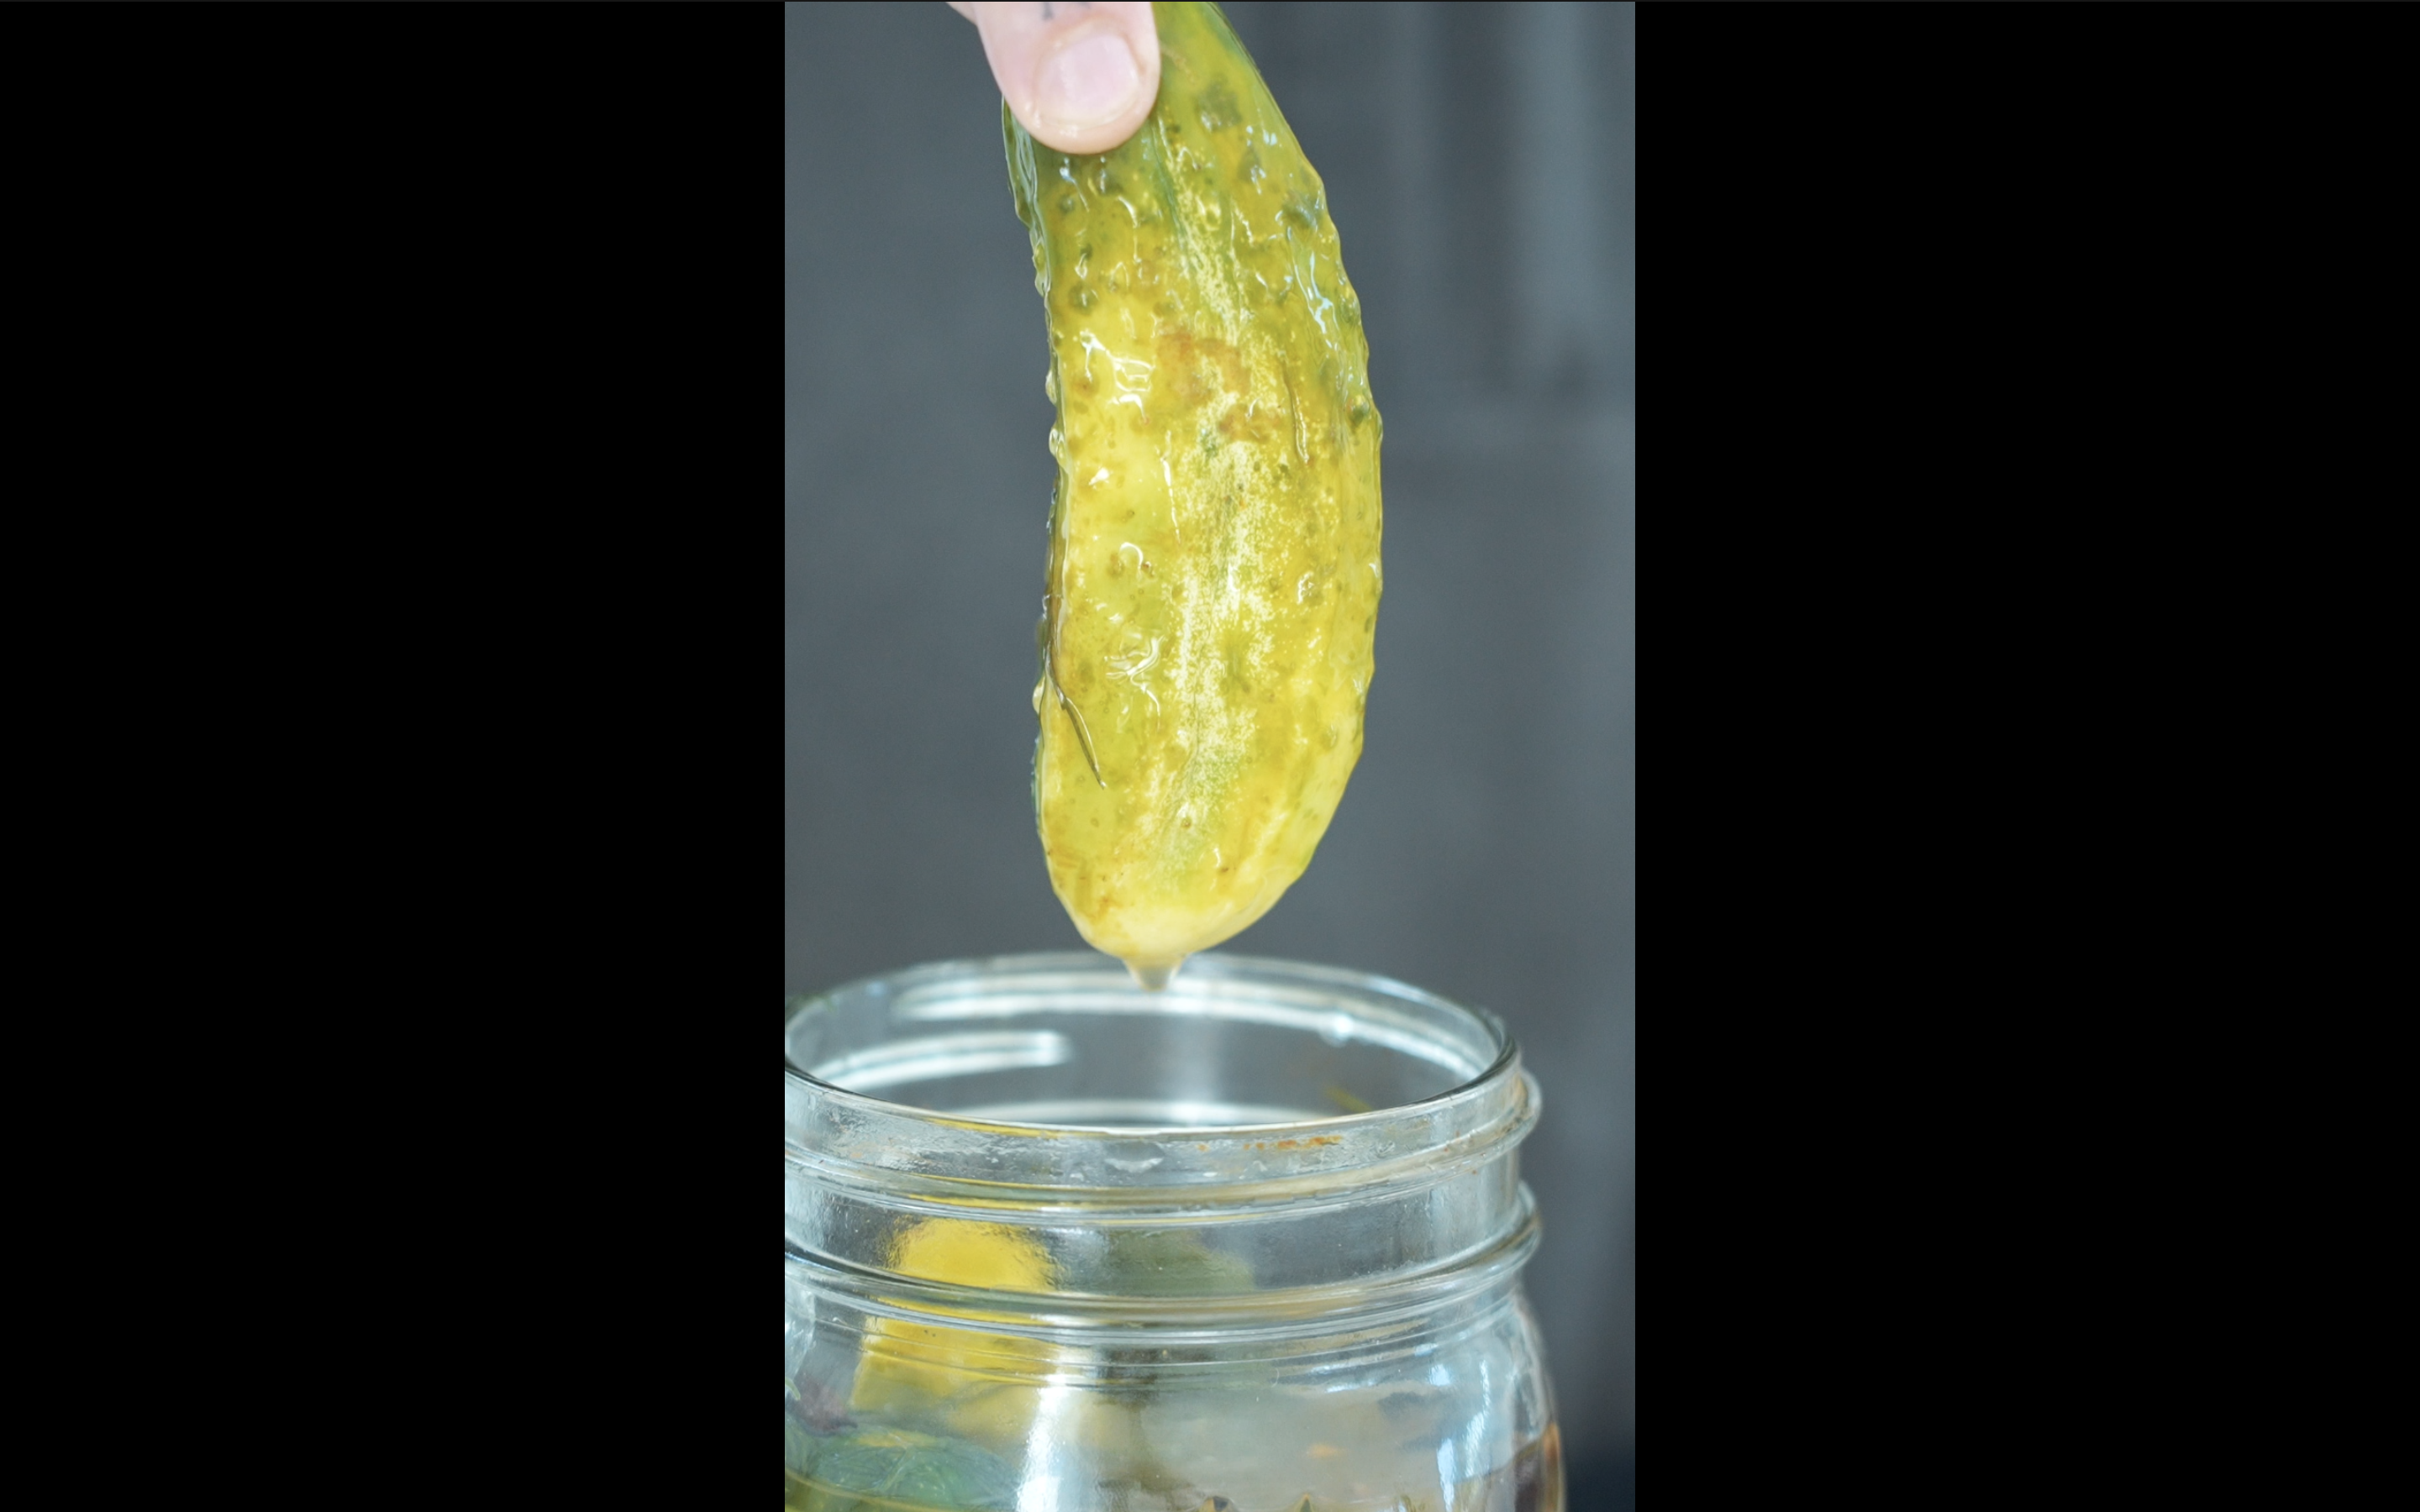 Pickles and Cheese: Half Gallon Size Canning Jars